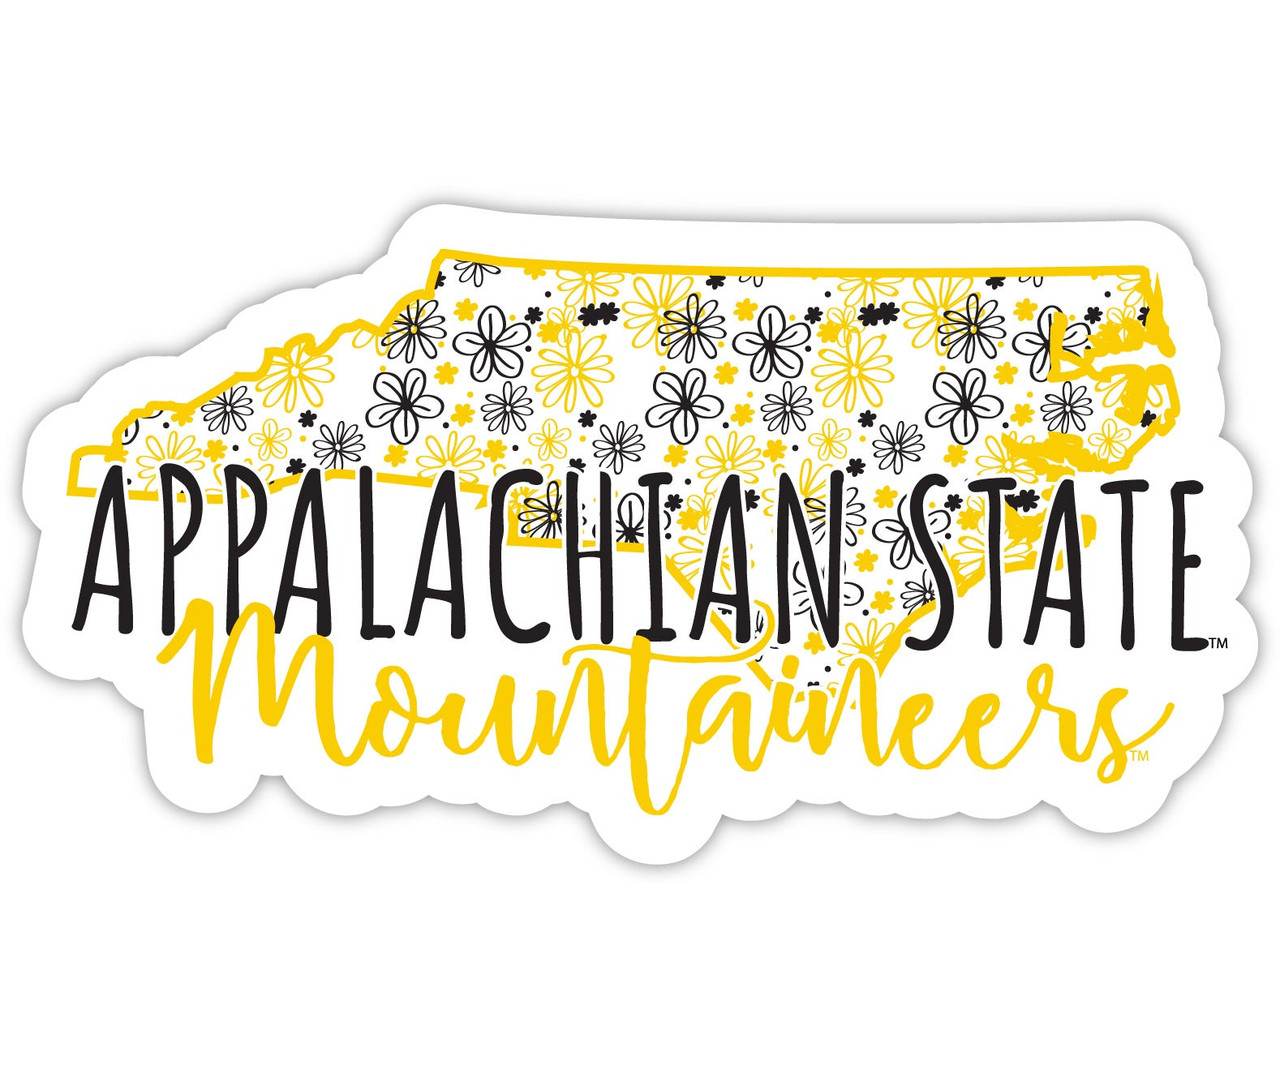 Appalachian State Floral State Die Cut Decal 2-Inch